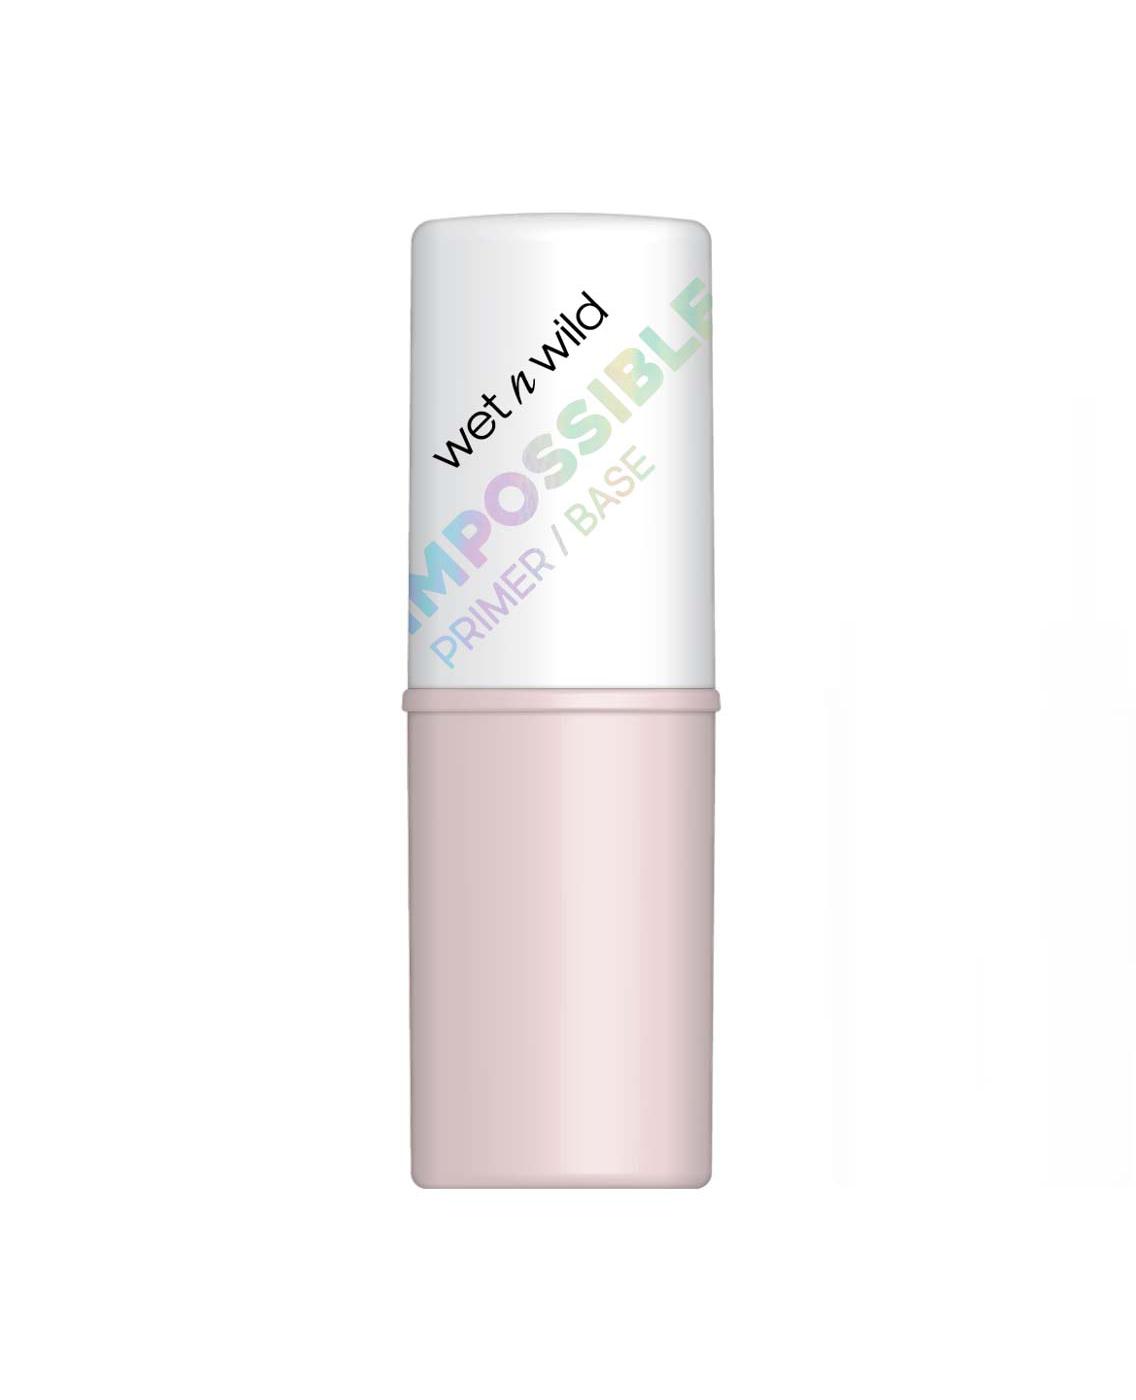 Wet n Wild Impossible Primer Stick; image 1 of 2